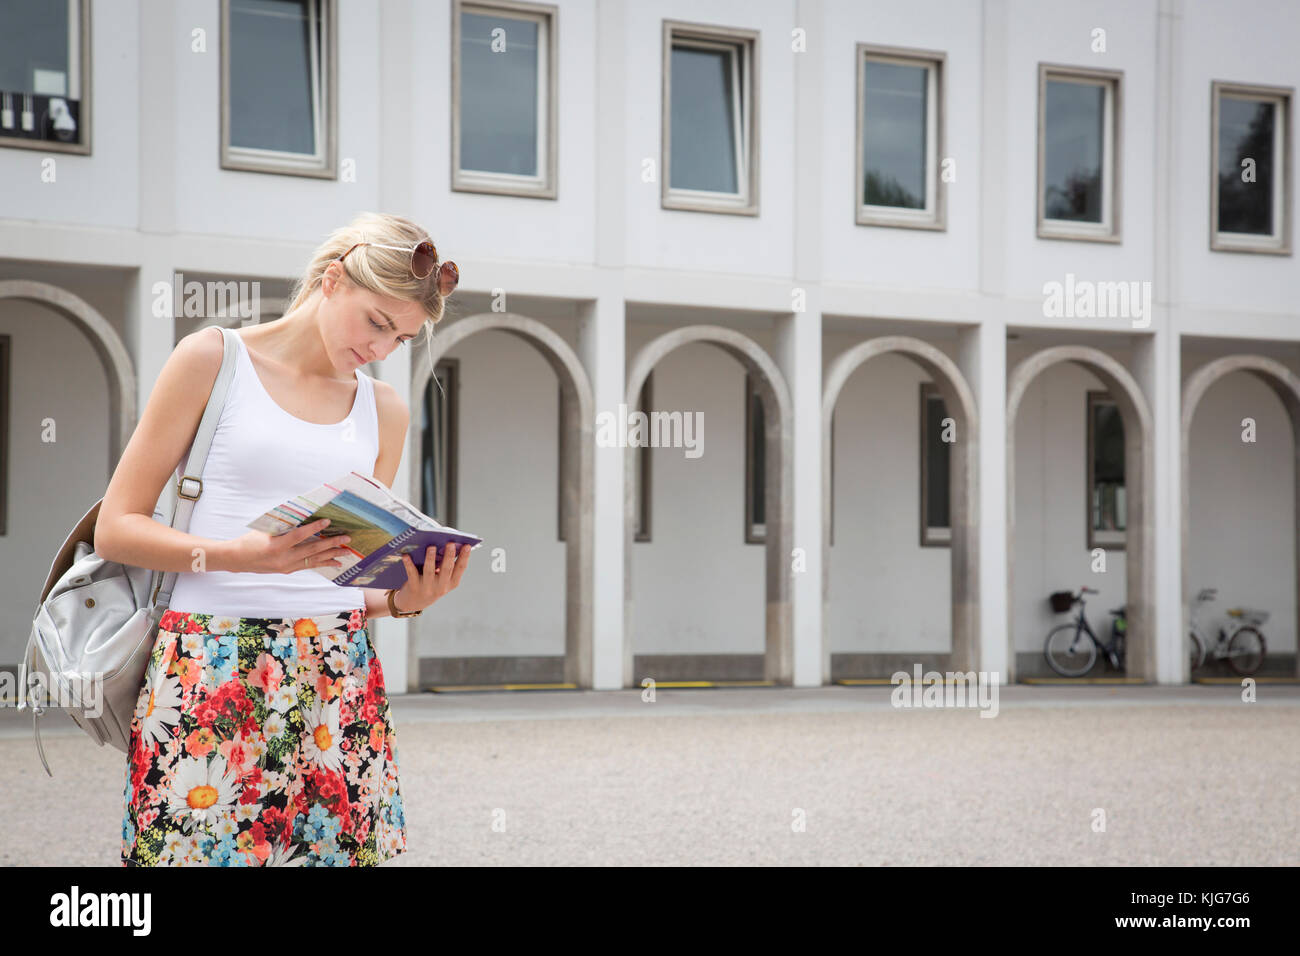 Germany, Karlsruhe, tourist looking at tour guide Stock Photo